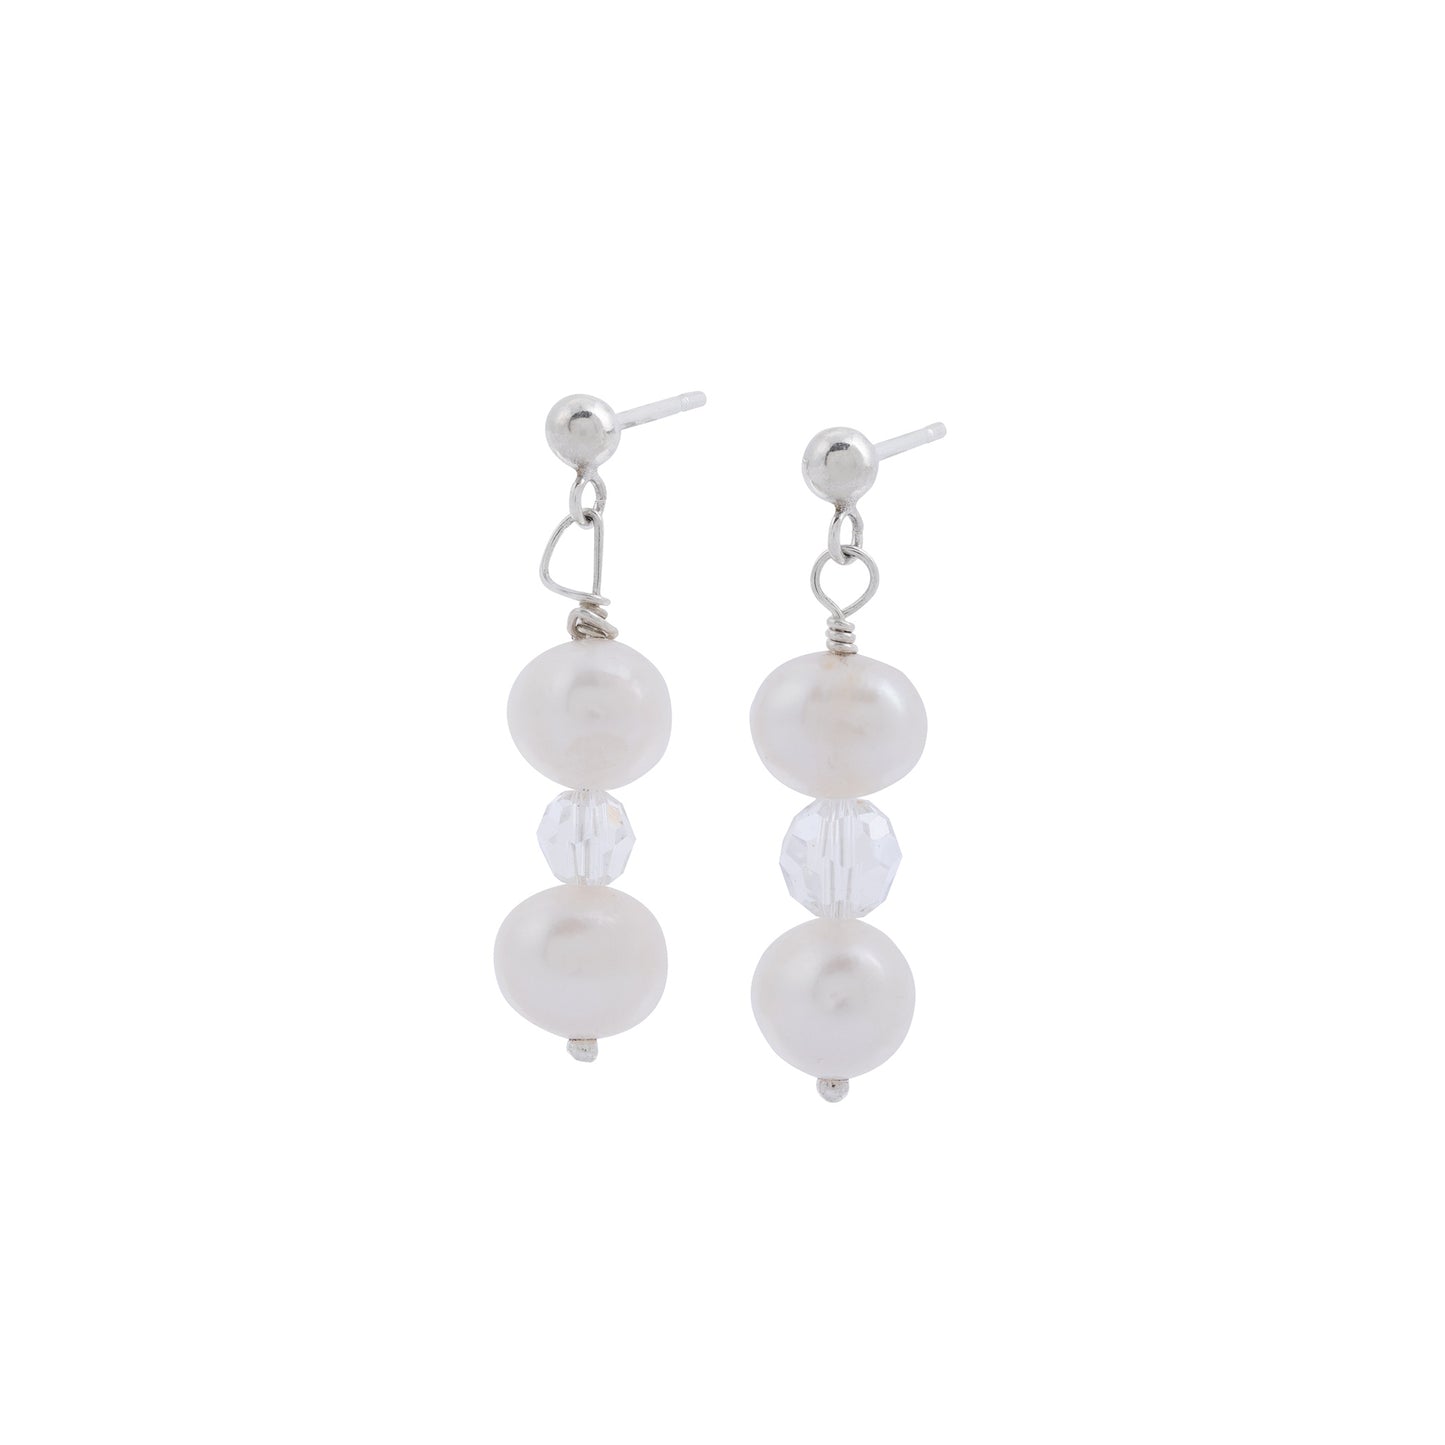 A pair of Pearl and Crystal Drop Earrings by Made Here with Love are shown against a plain white background. Each earring features two freshwater pearls with a clear, faceted bead in between. They are suspended from silver posts with small spherical ends.